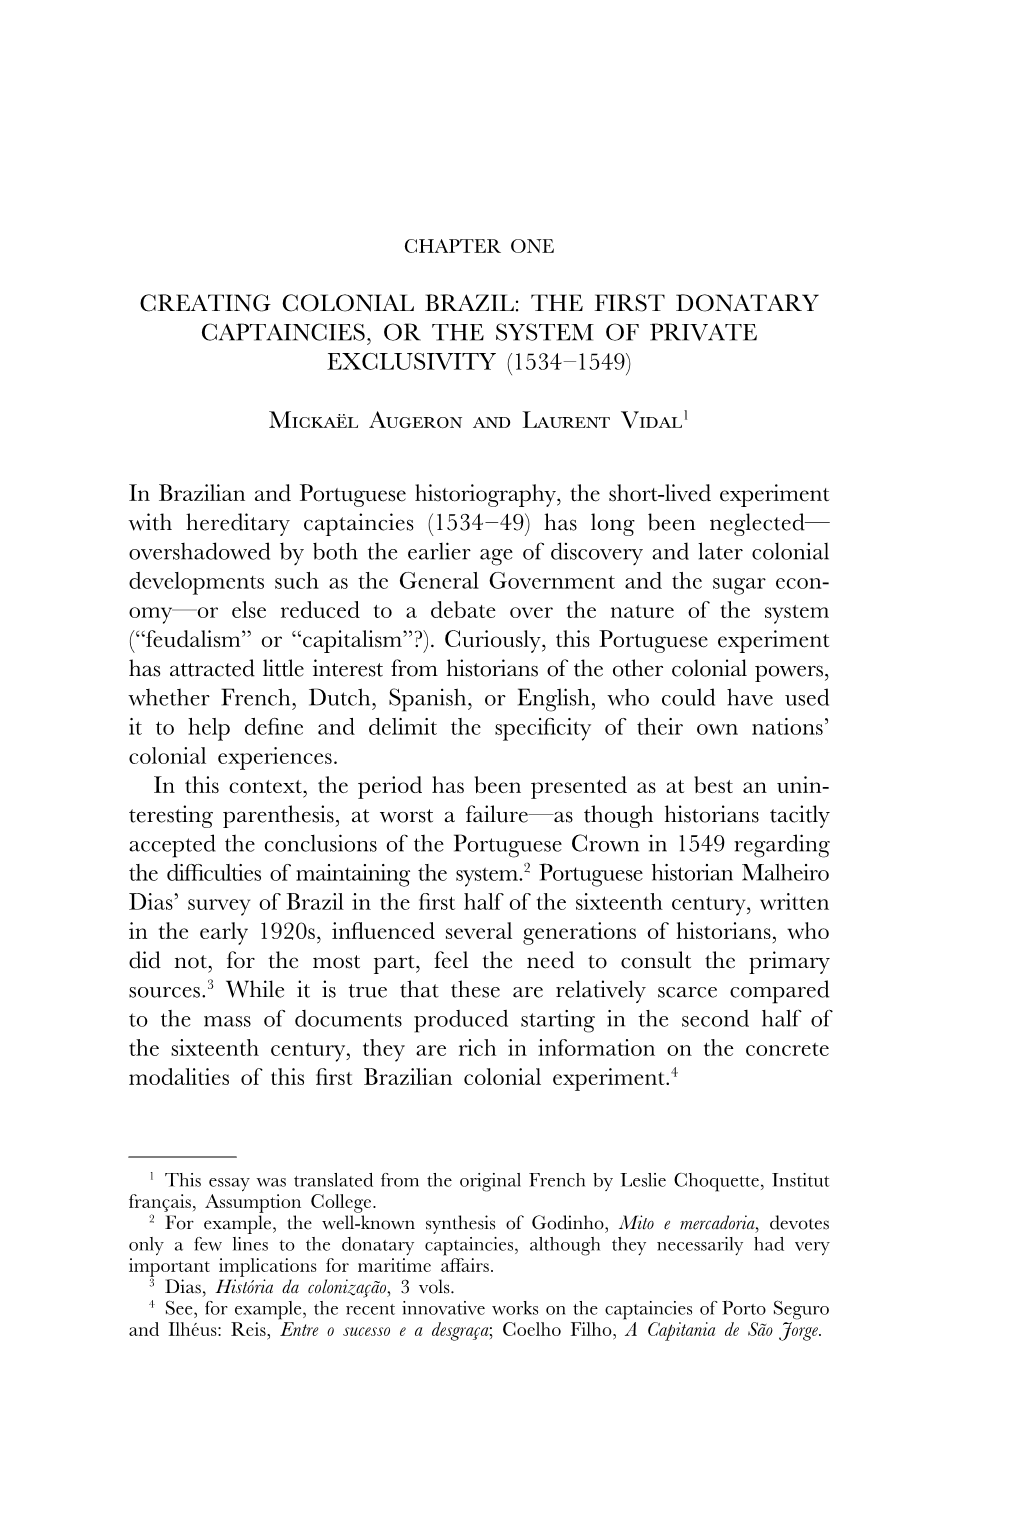 Creating Colonial Brazil: the First Donatary Captaincies, Or the System of Private Exclusivity (1534–1549)